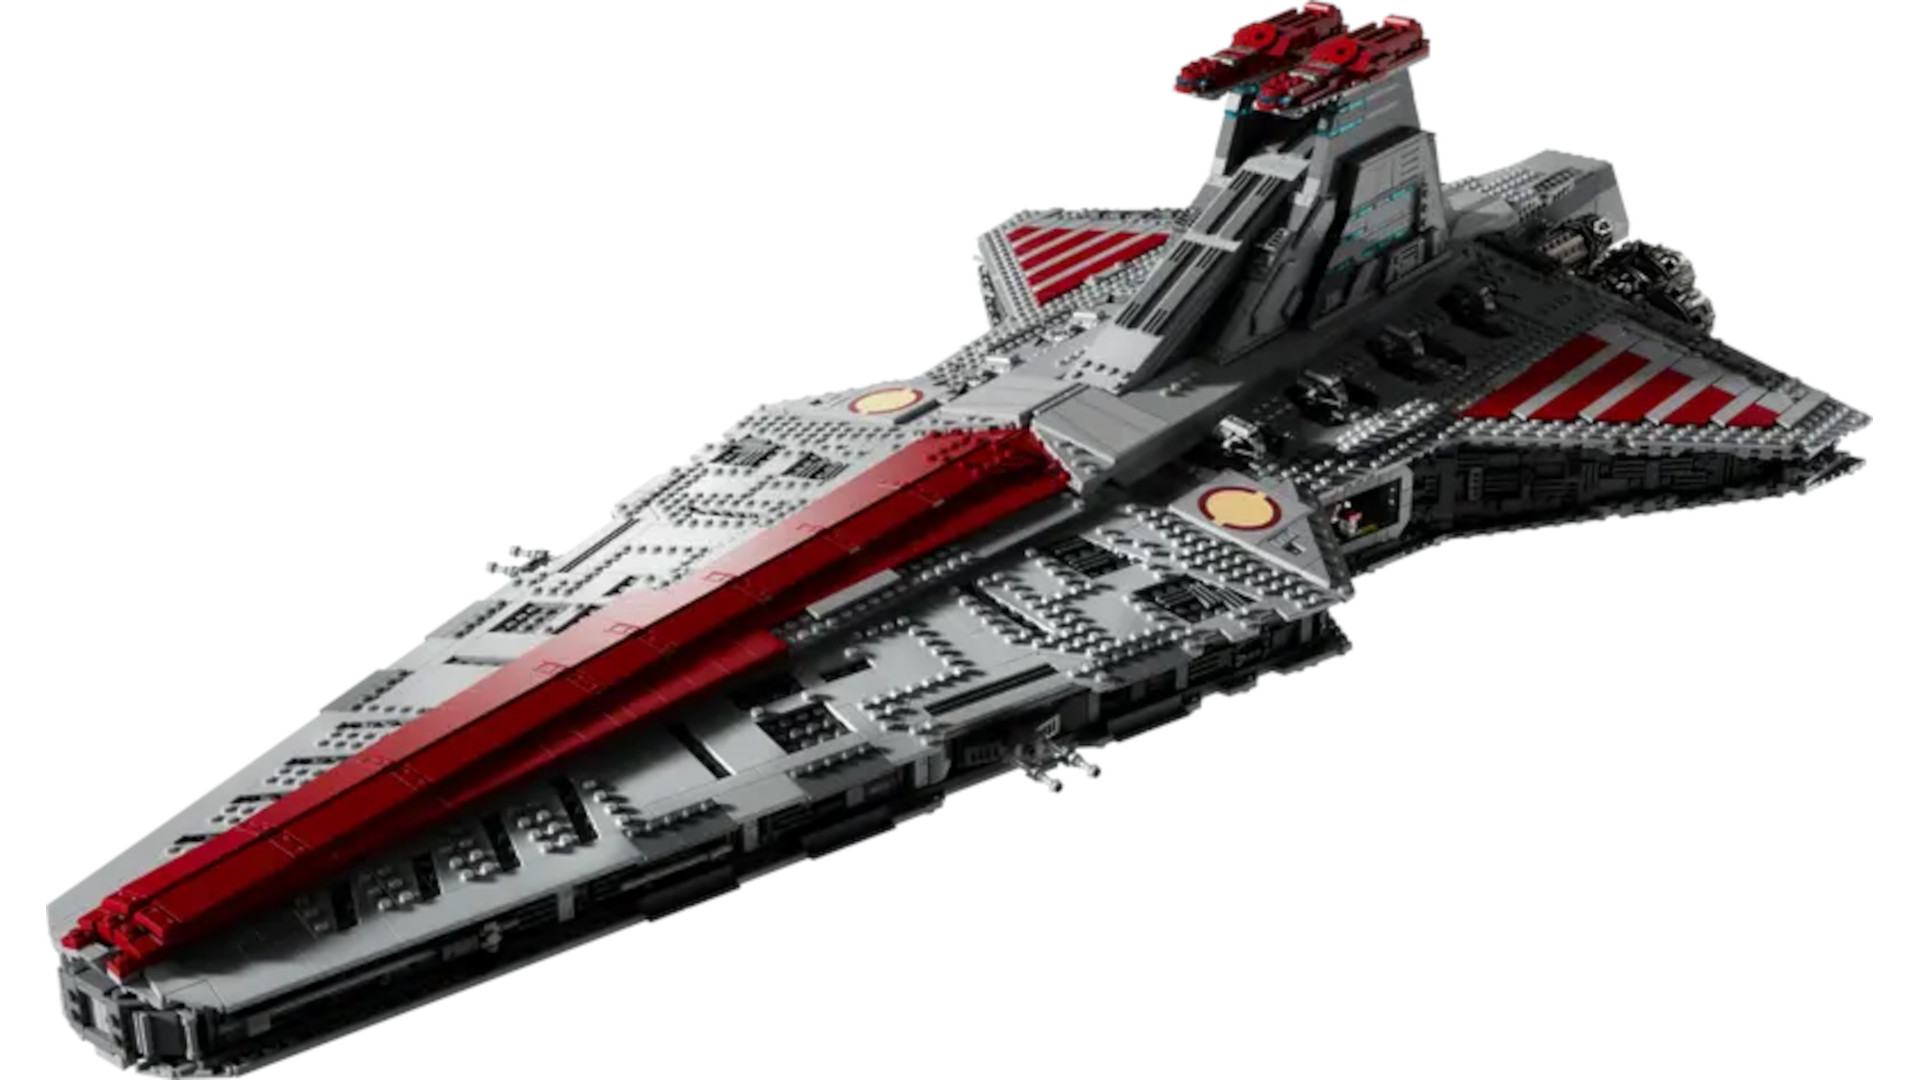 LEGO's BIGGEST Sets Ever Produced: A List of ALL Sets Over 1,000 Pieces!